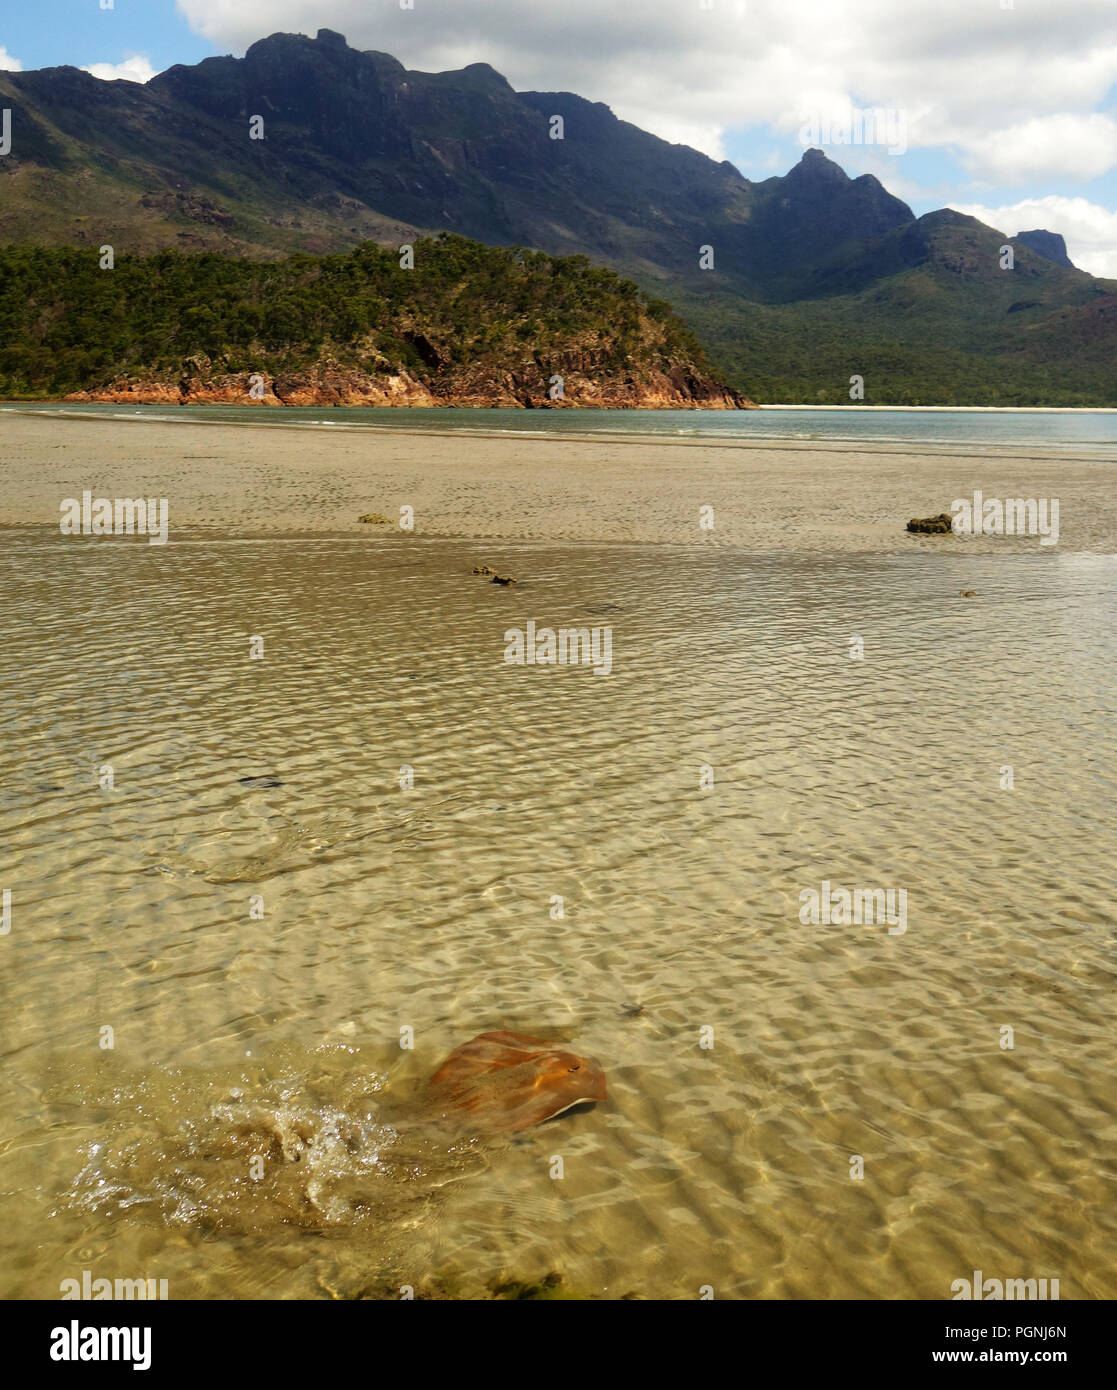 Stingray breaks cover in the shallows, Hinchinbrook Island National Park, Queensland, Australia Stock Photo